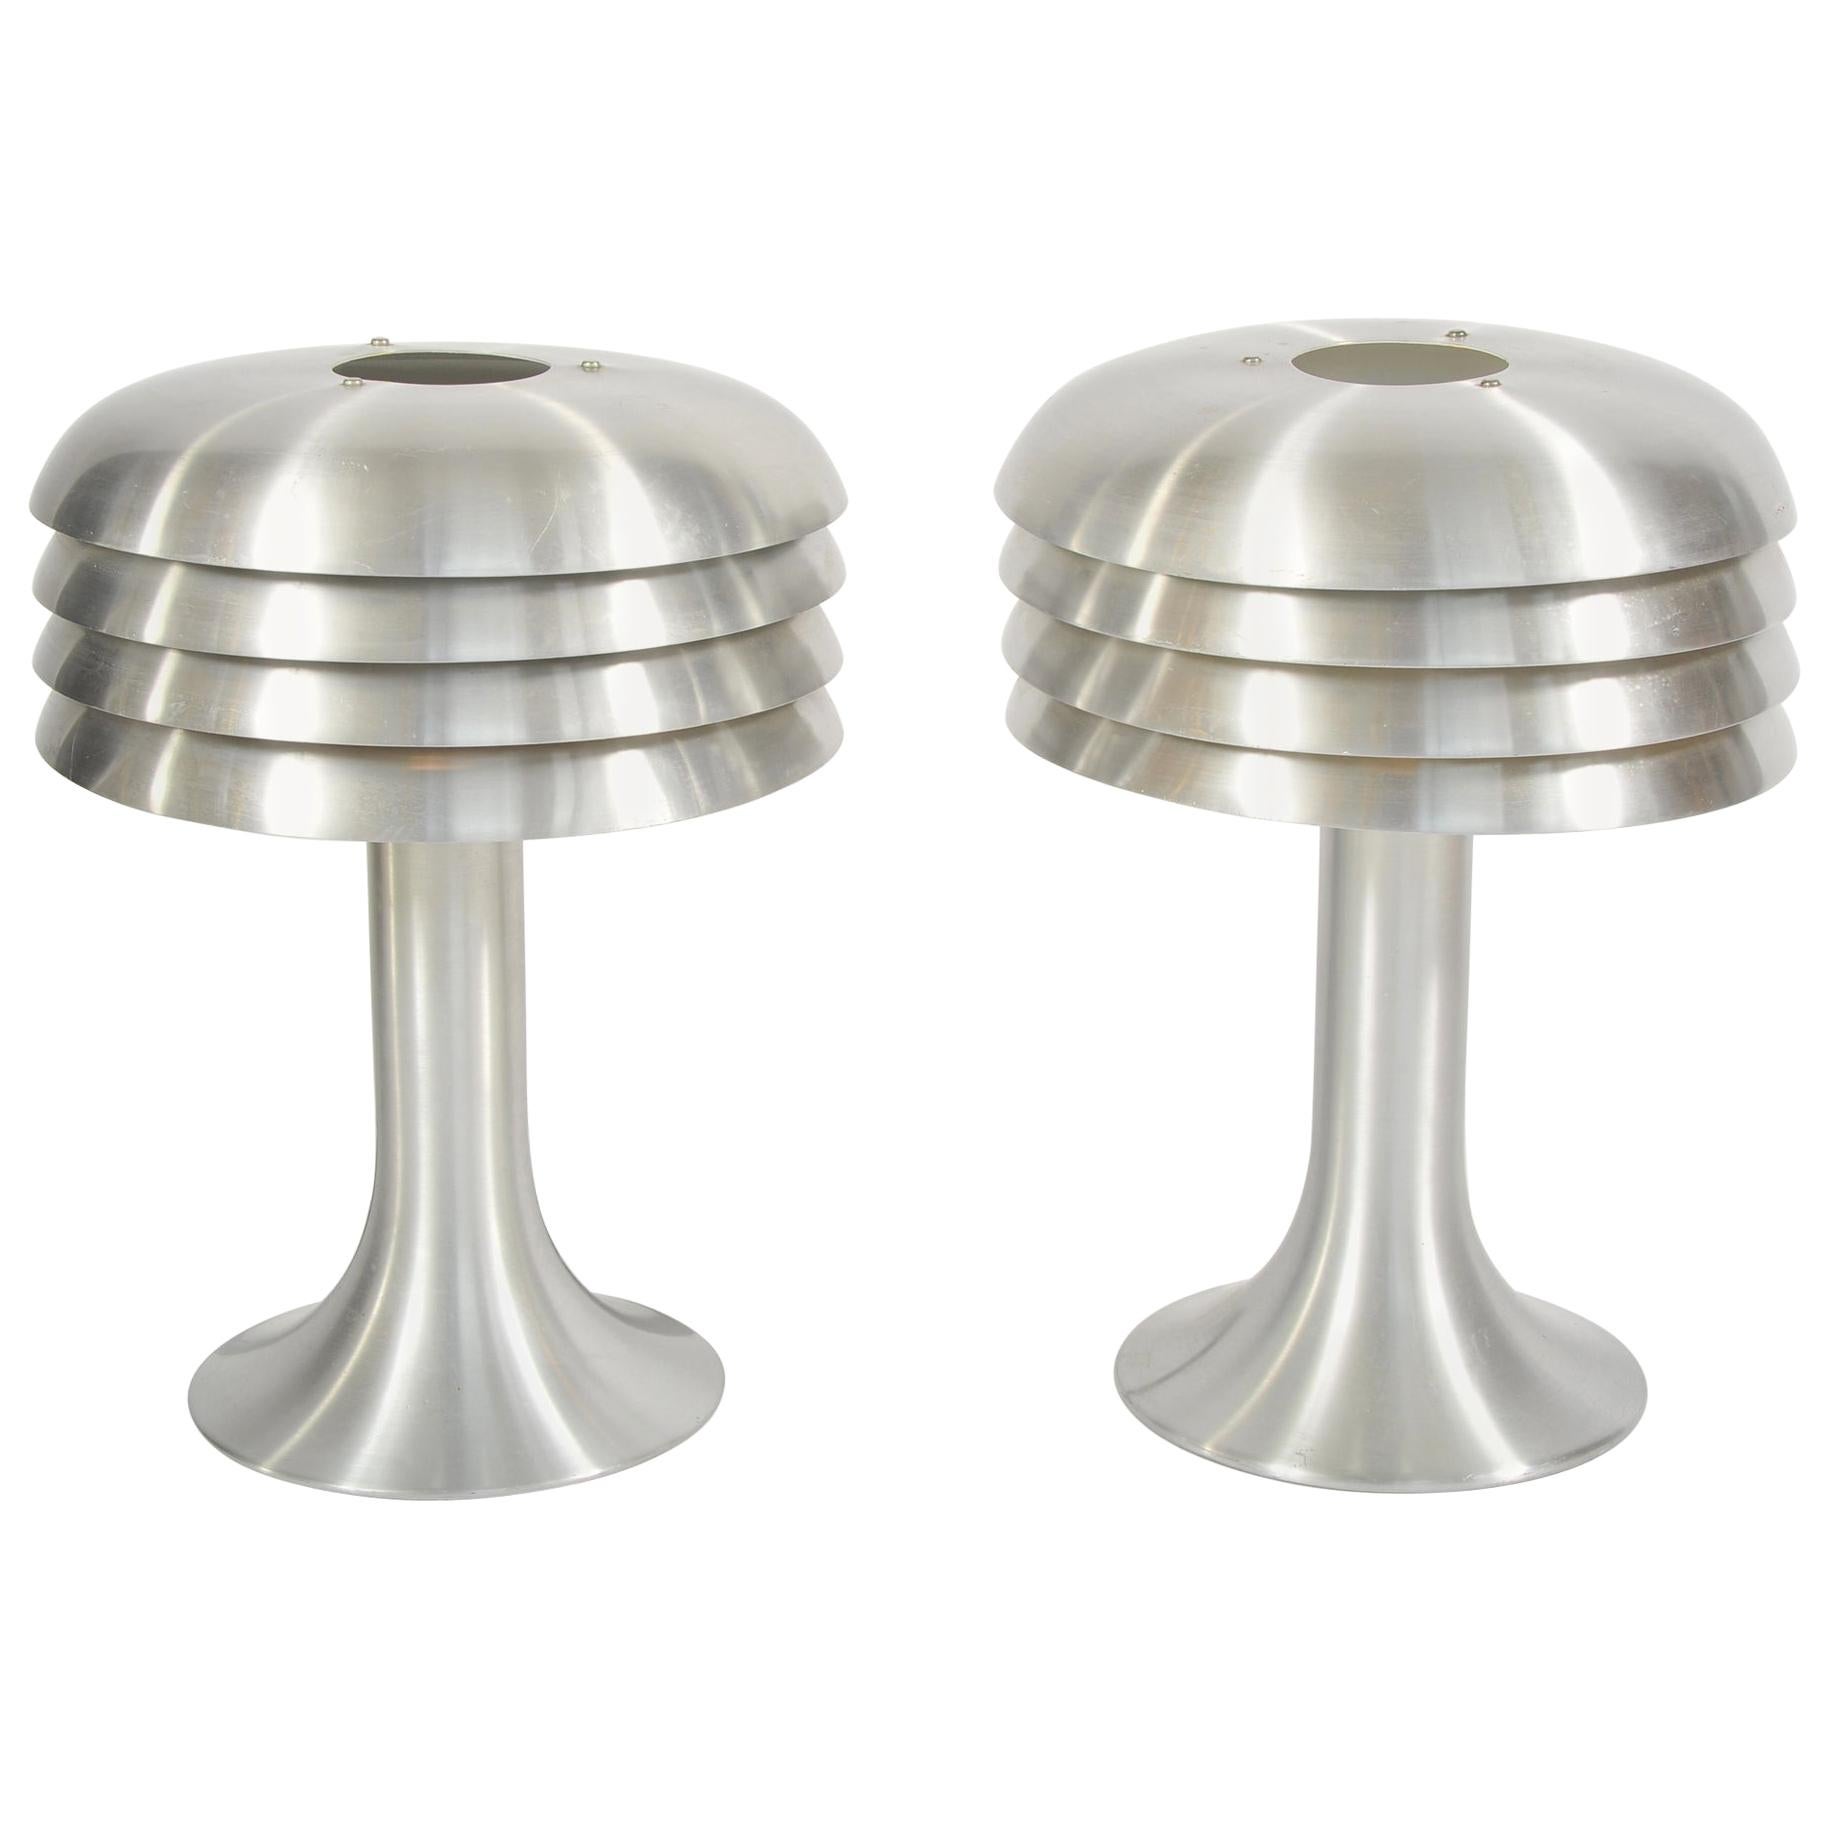 Pair of 1960s Chrome Table Lamps by Hans-Agne Jakobsson